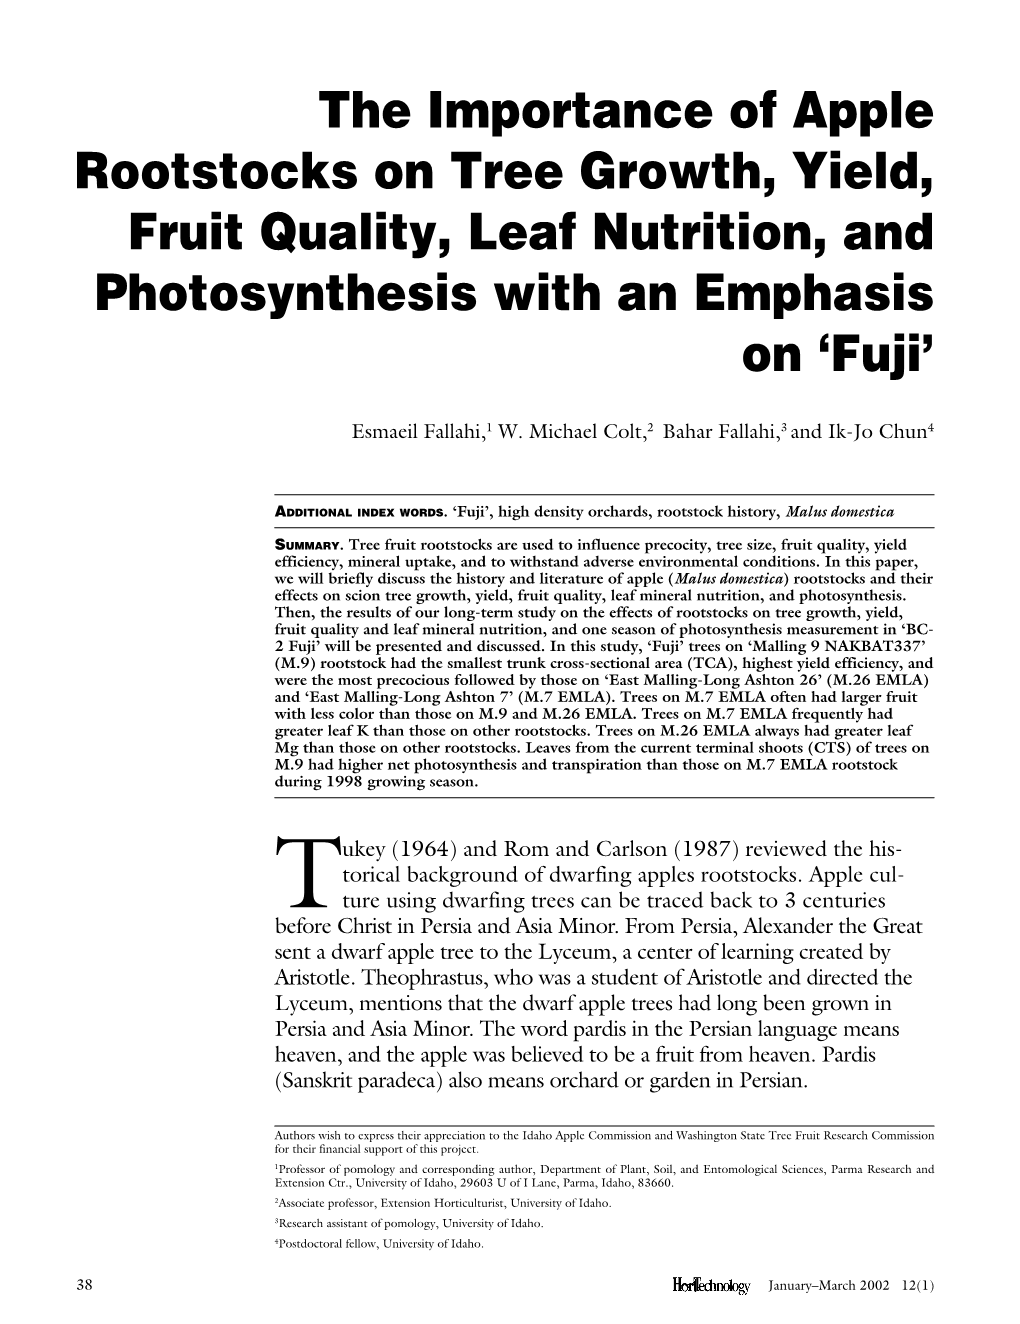 The Importance of Apple Rootstocks on Tree Growth, Yield, Fruit Quality, Leaf Nutrition, and Photosynthesis with an Emphasis on ‘Fuji’